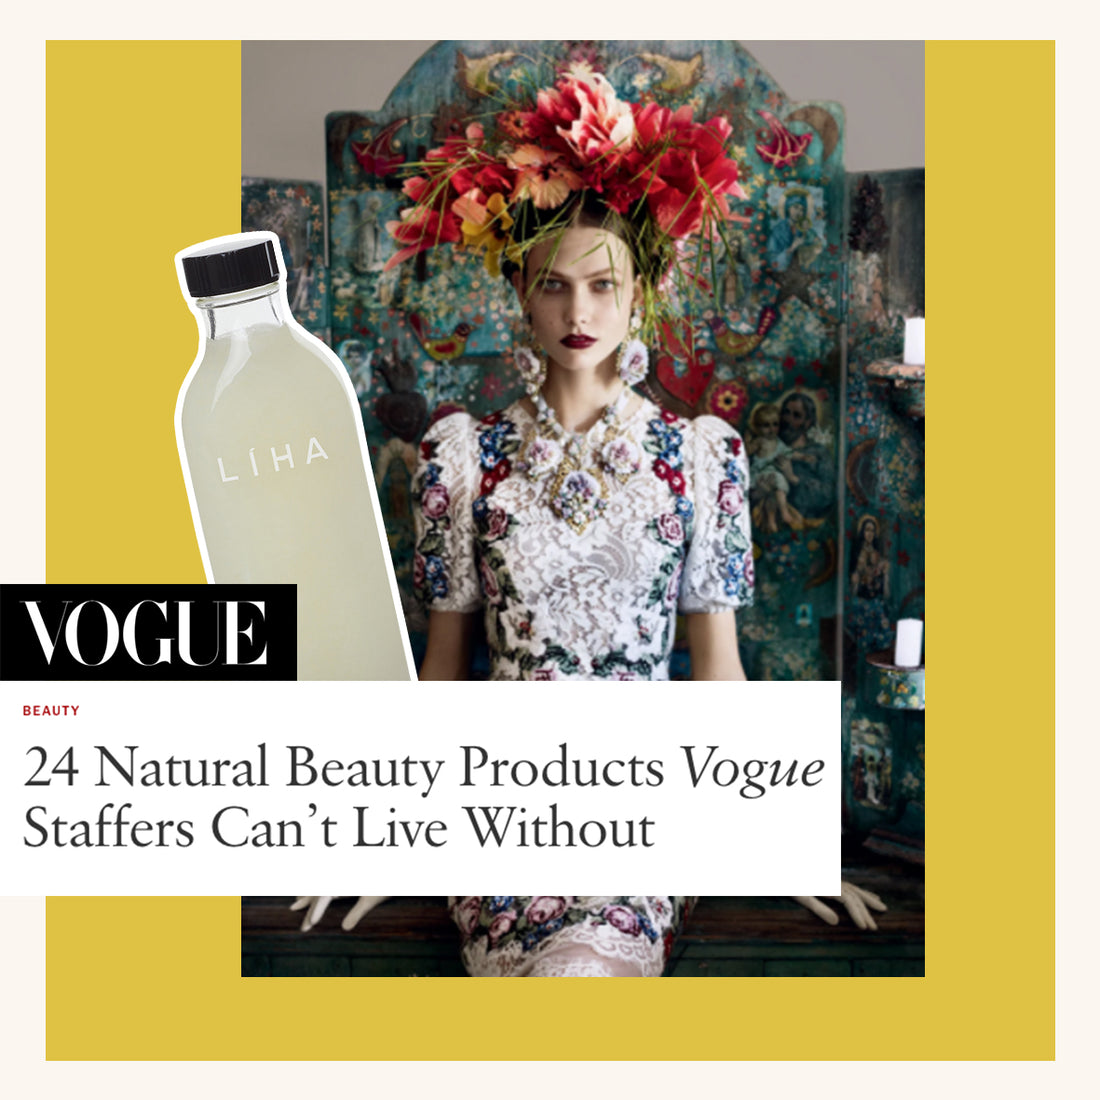 VOGUE: 24 Natural Beauty Product Vogue Staffers Can't Live Without